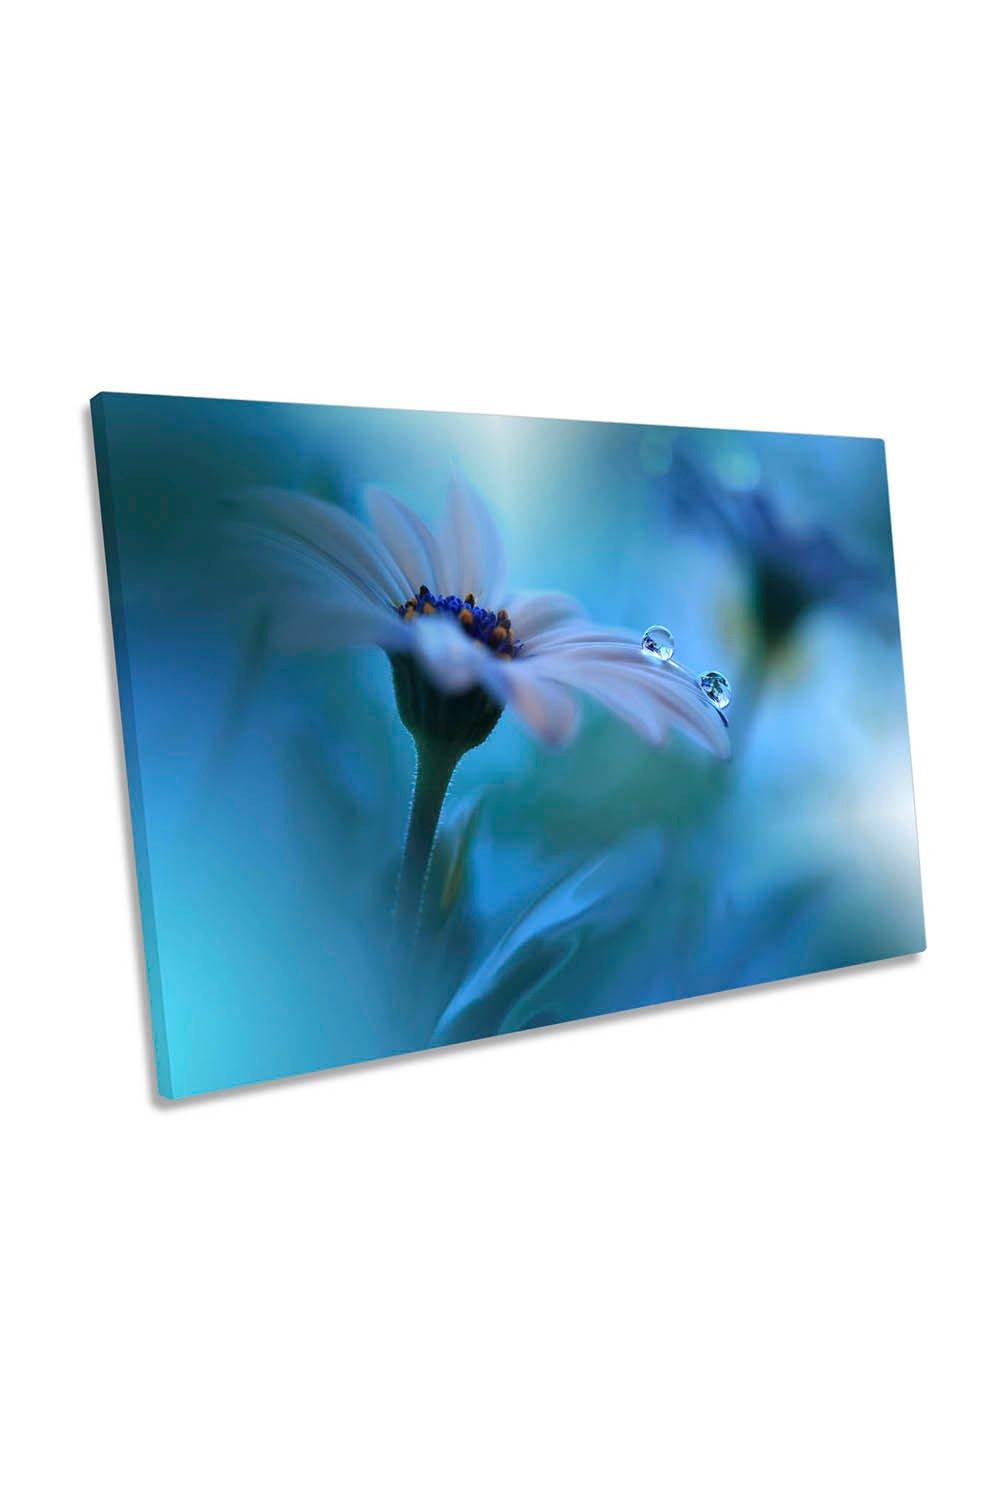 Beyond Visible Blue Flower Floral Canvas Wall Art Picture Print